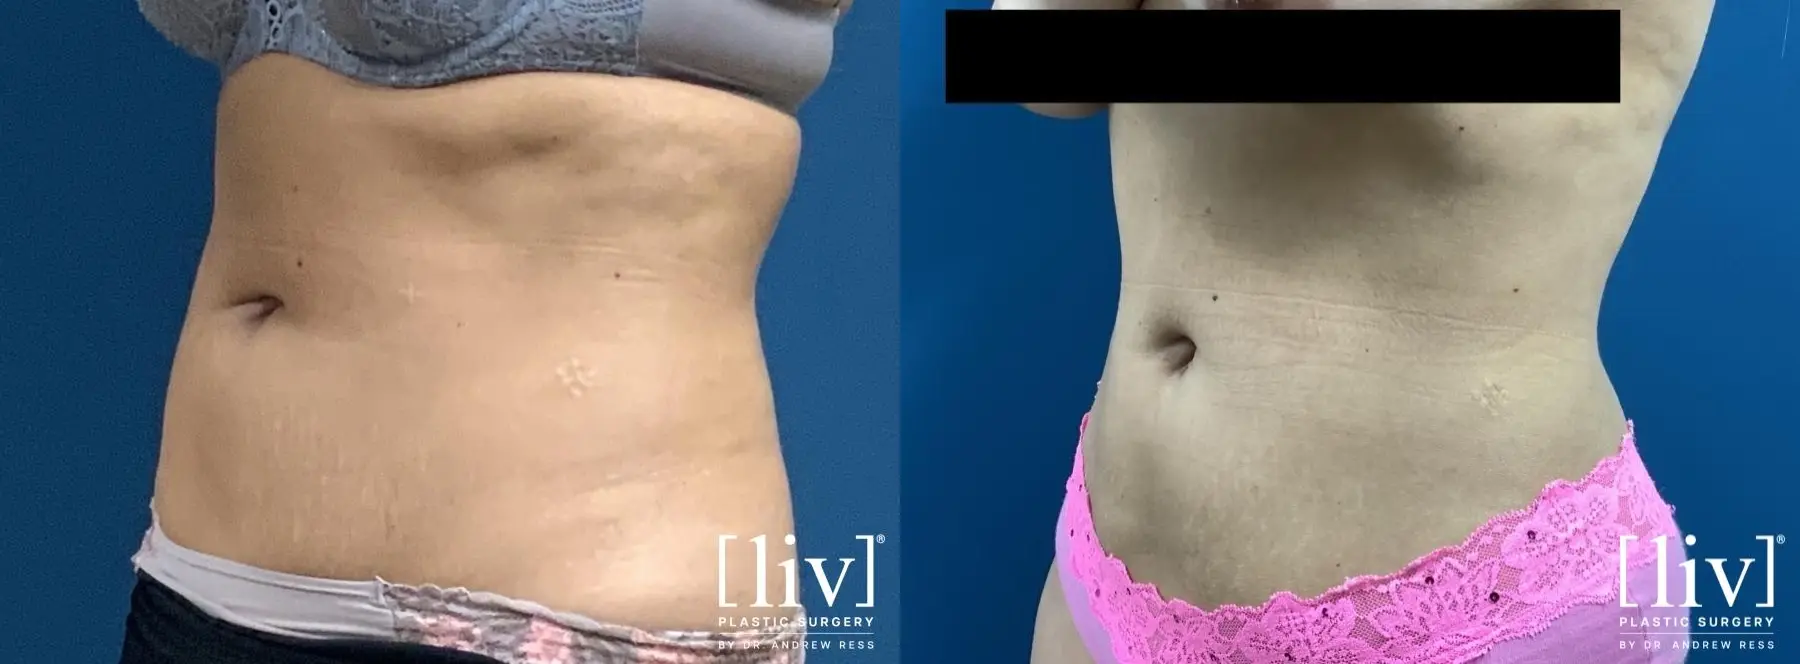 Liposuction: Patient 2 - Before and After 2